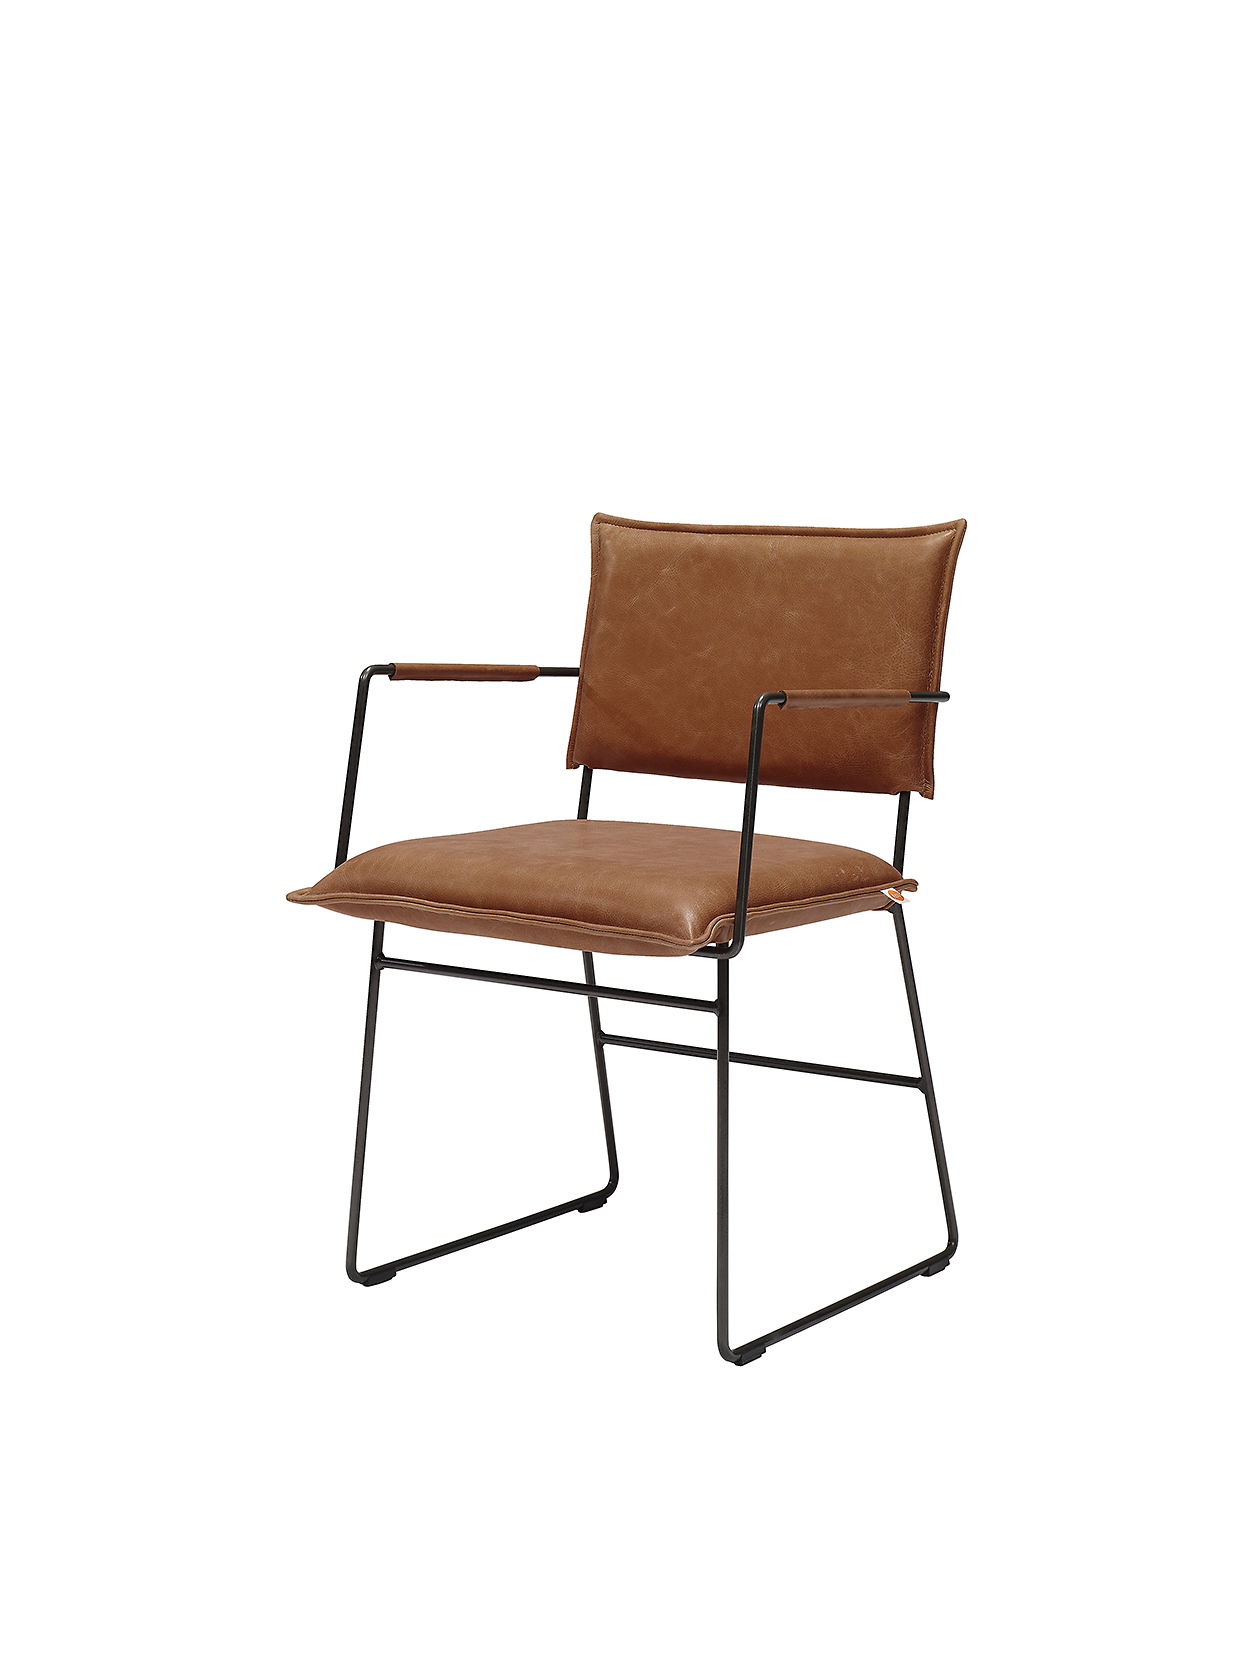 Norman Chair With Arm Bonanza Tan Pers LR ZS 8720153744492